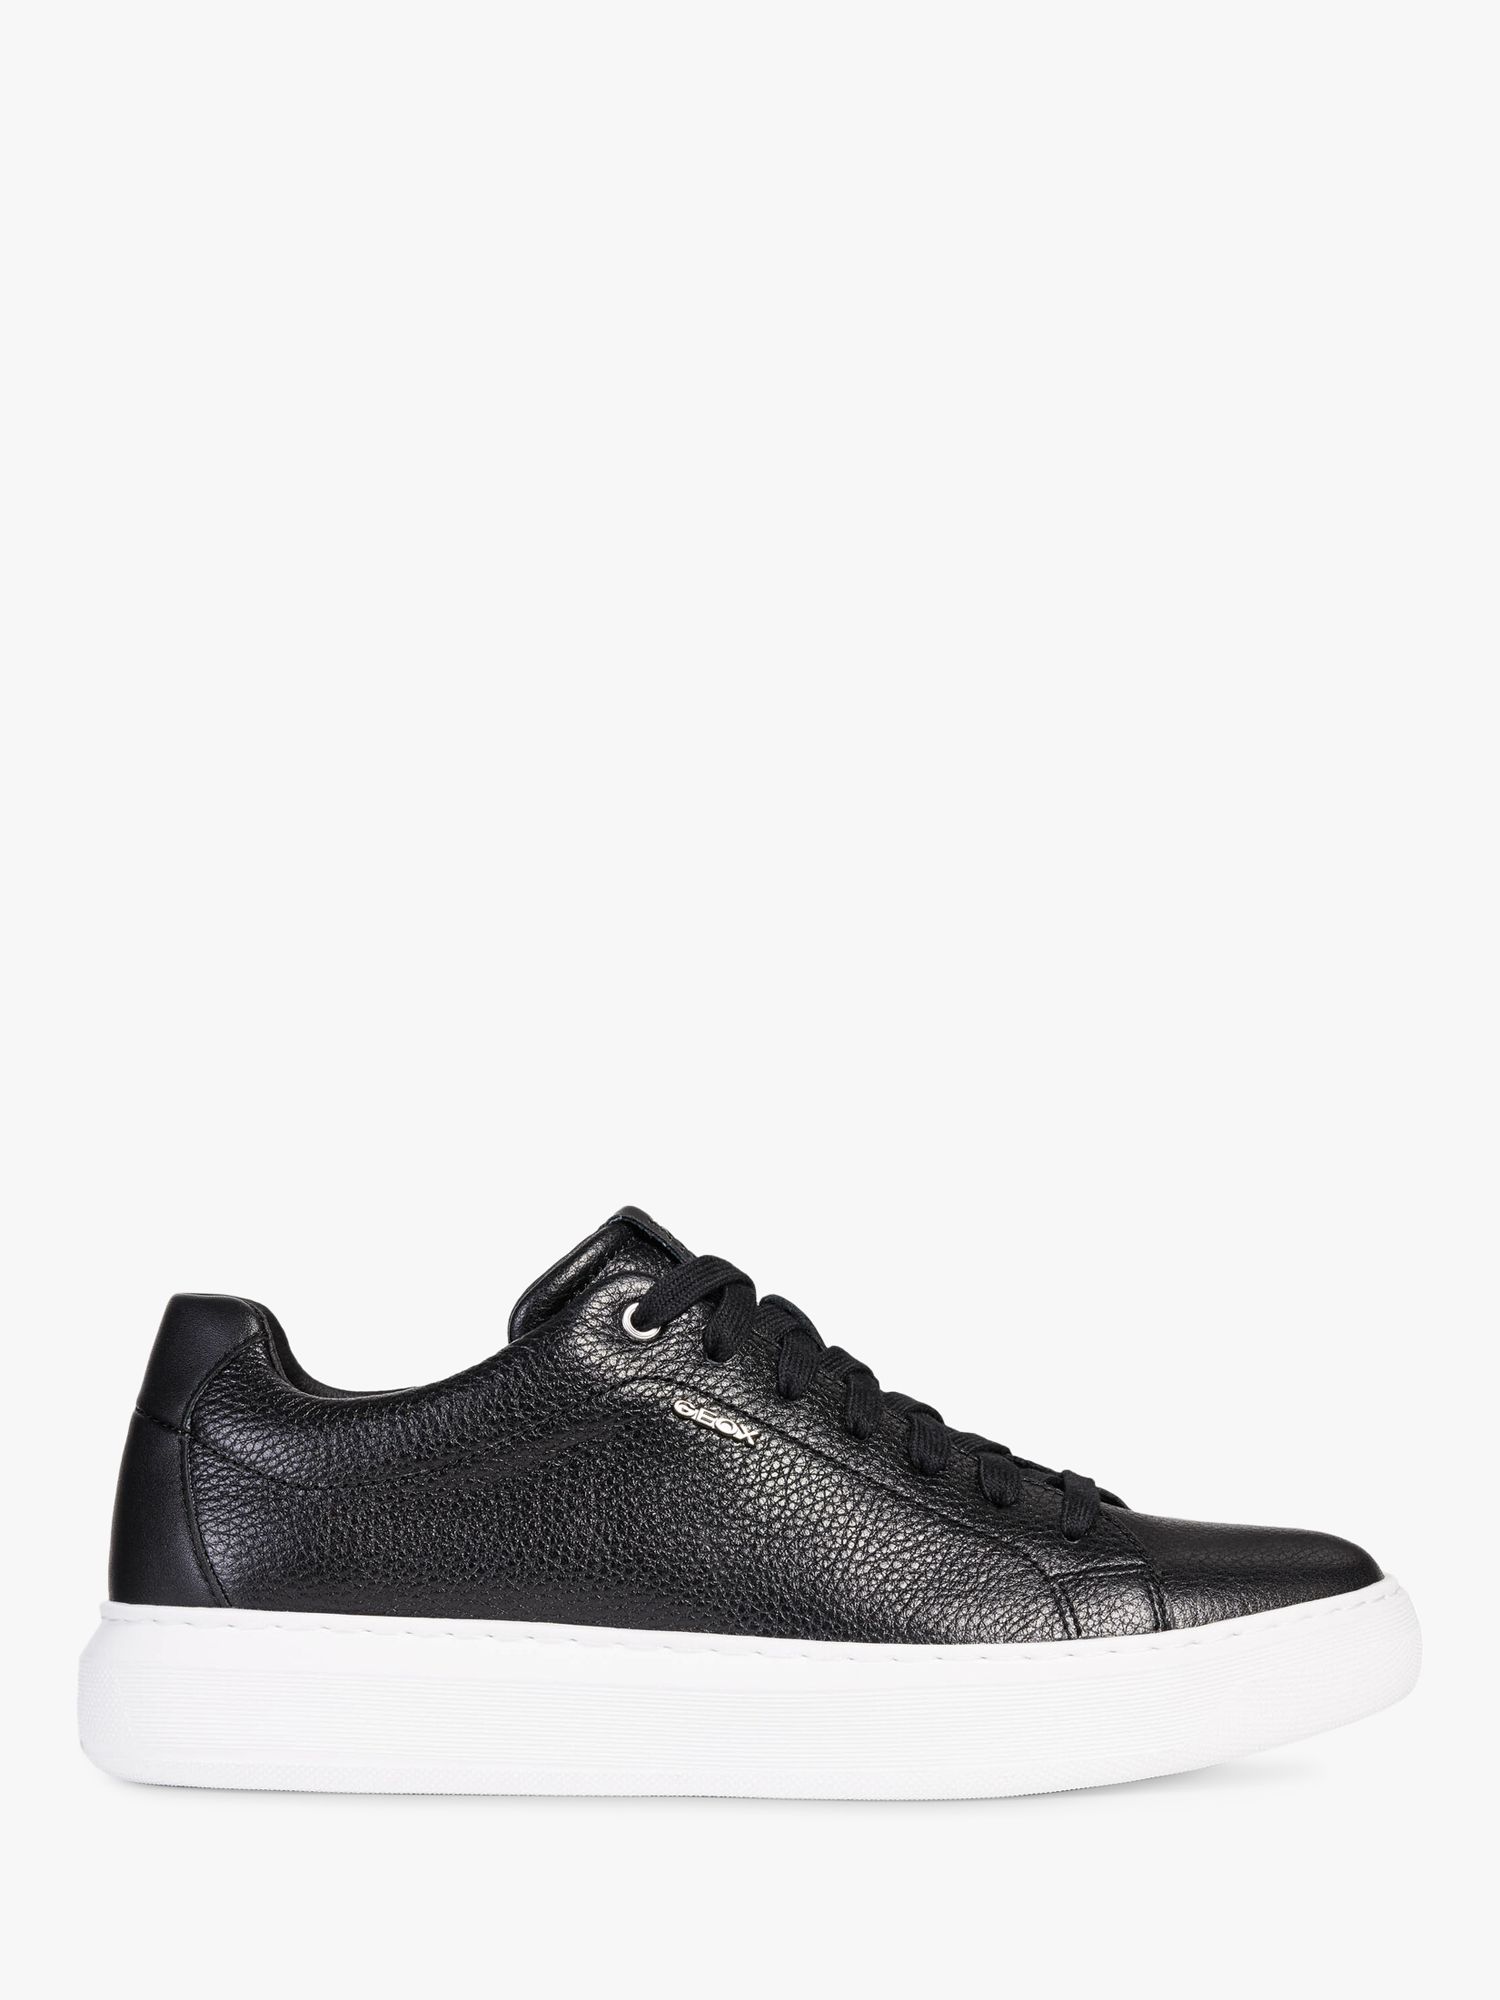 Geox Deiven Leather Trainers, Black at John Lewis & Partners